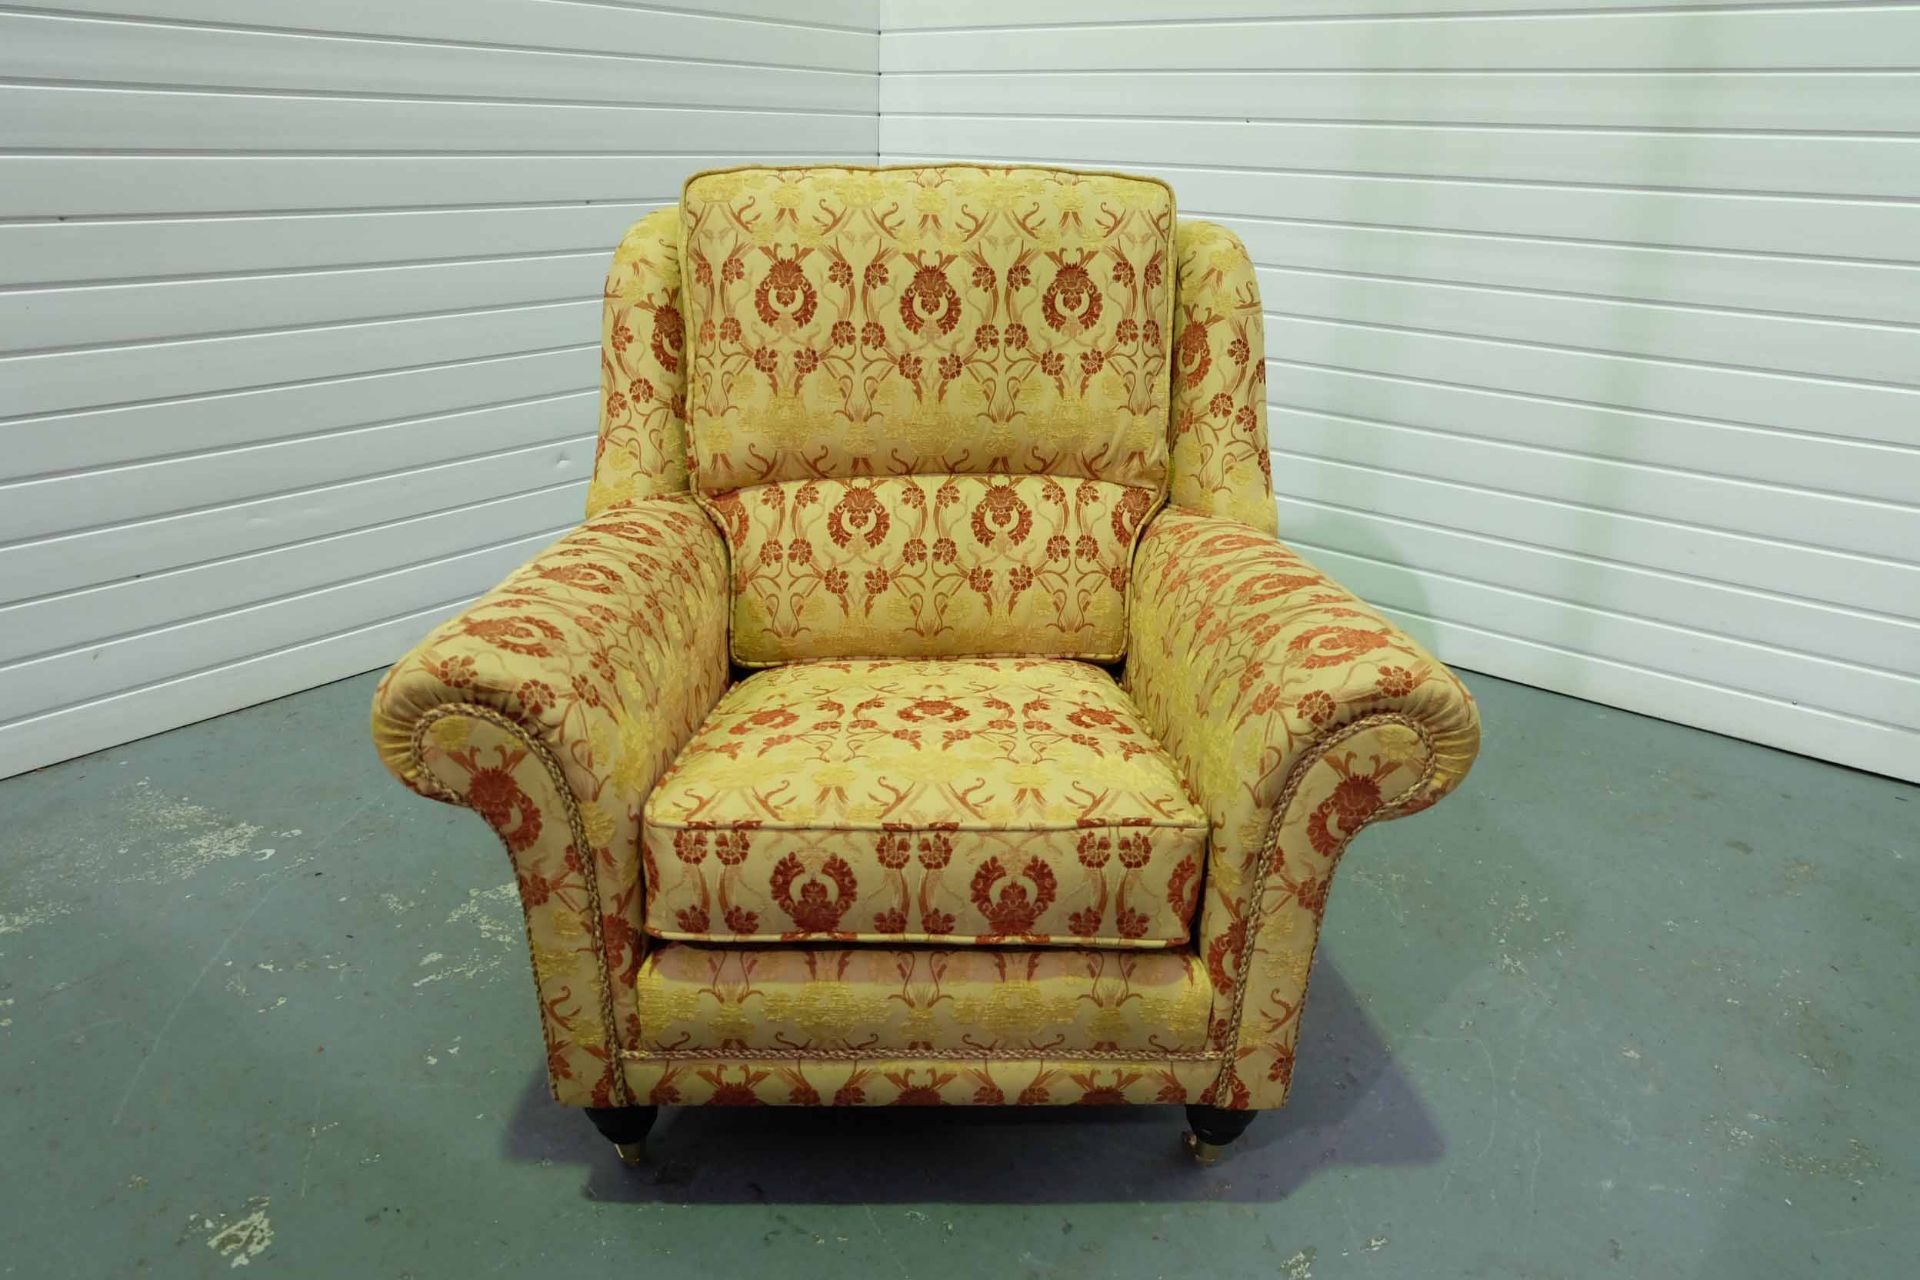 Steed Upholstery 'Lincoln' Range Fully Handmade Chair. Castor Wheels to the Front of the Chair. In J